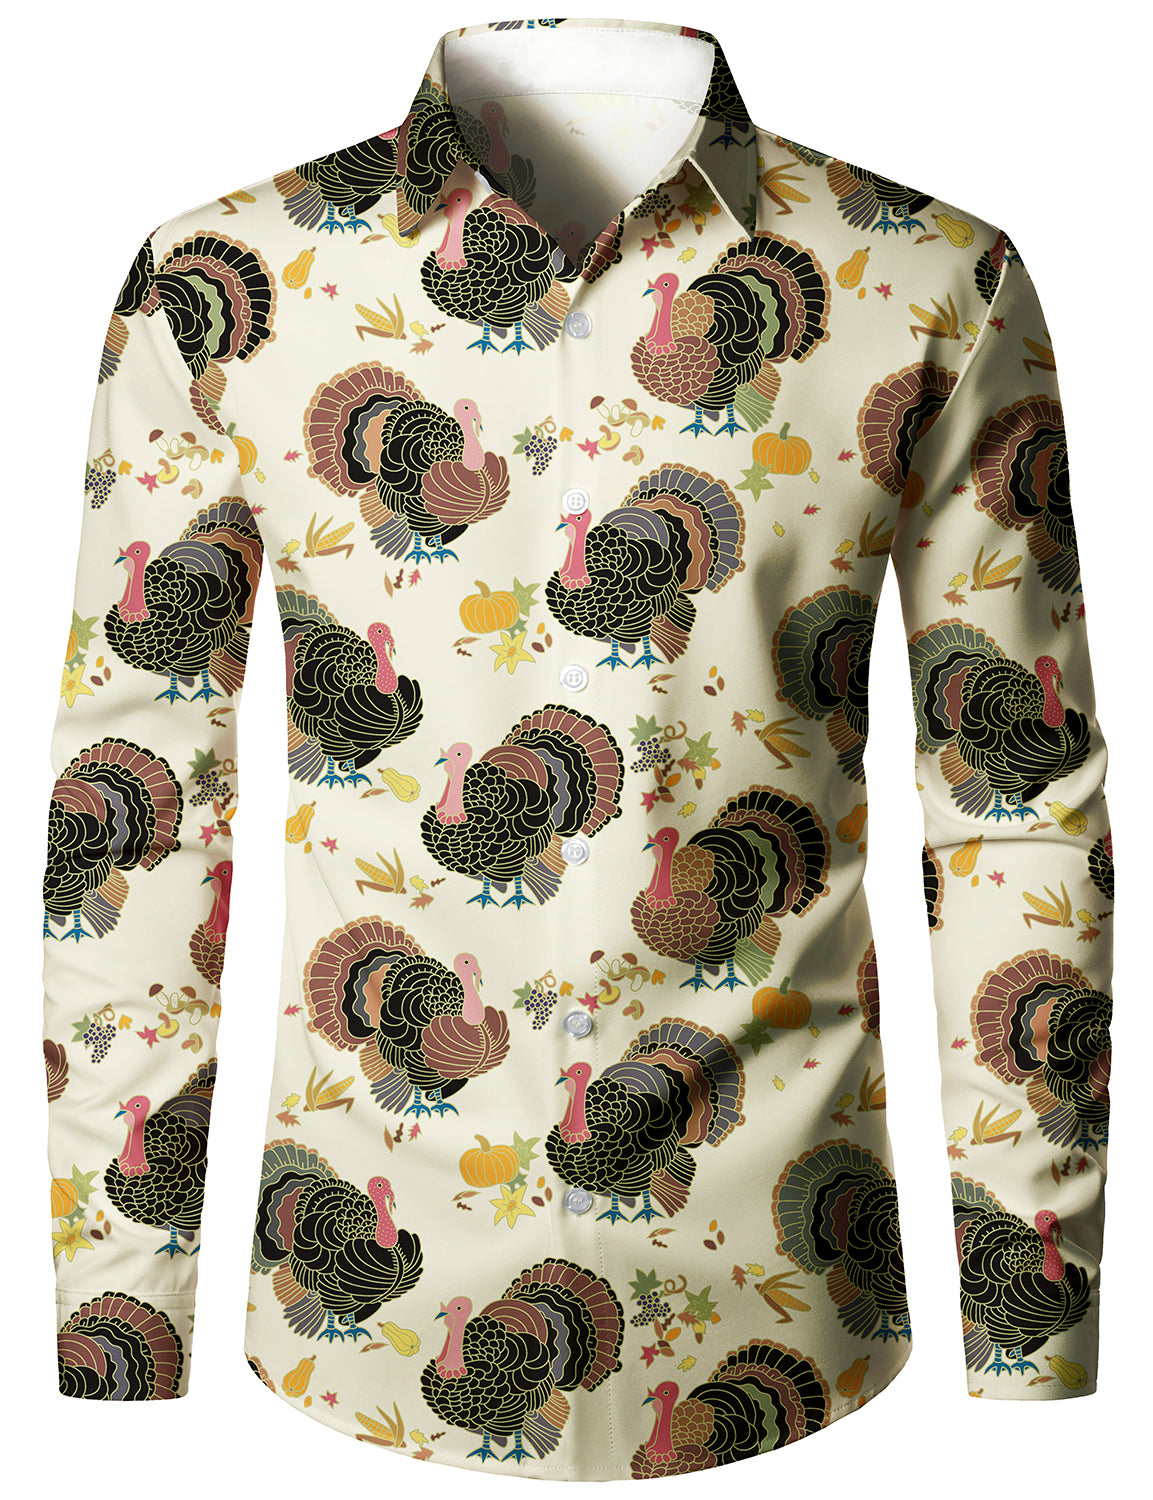 Men's Thanksgiving Turkey Day Holiday Fall Festival Gift Button Up Long Sleeve Shirt